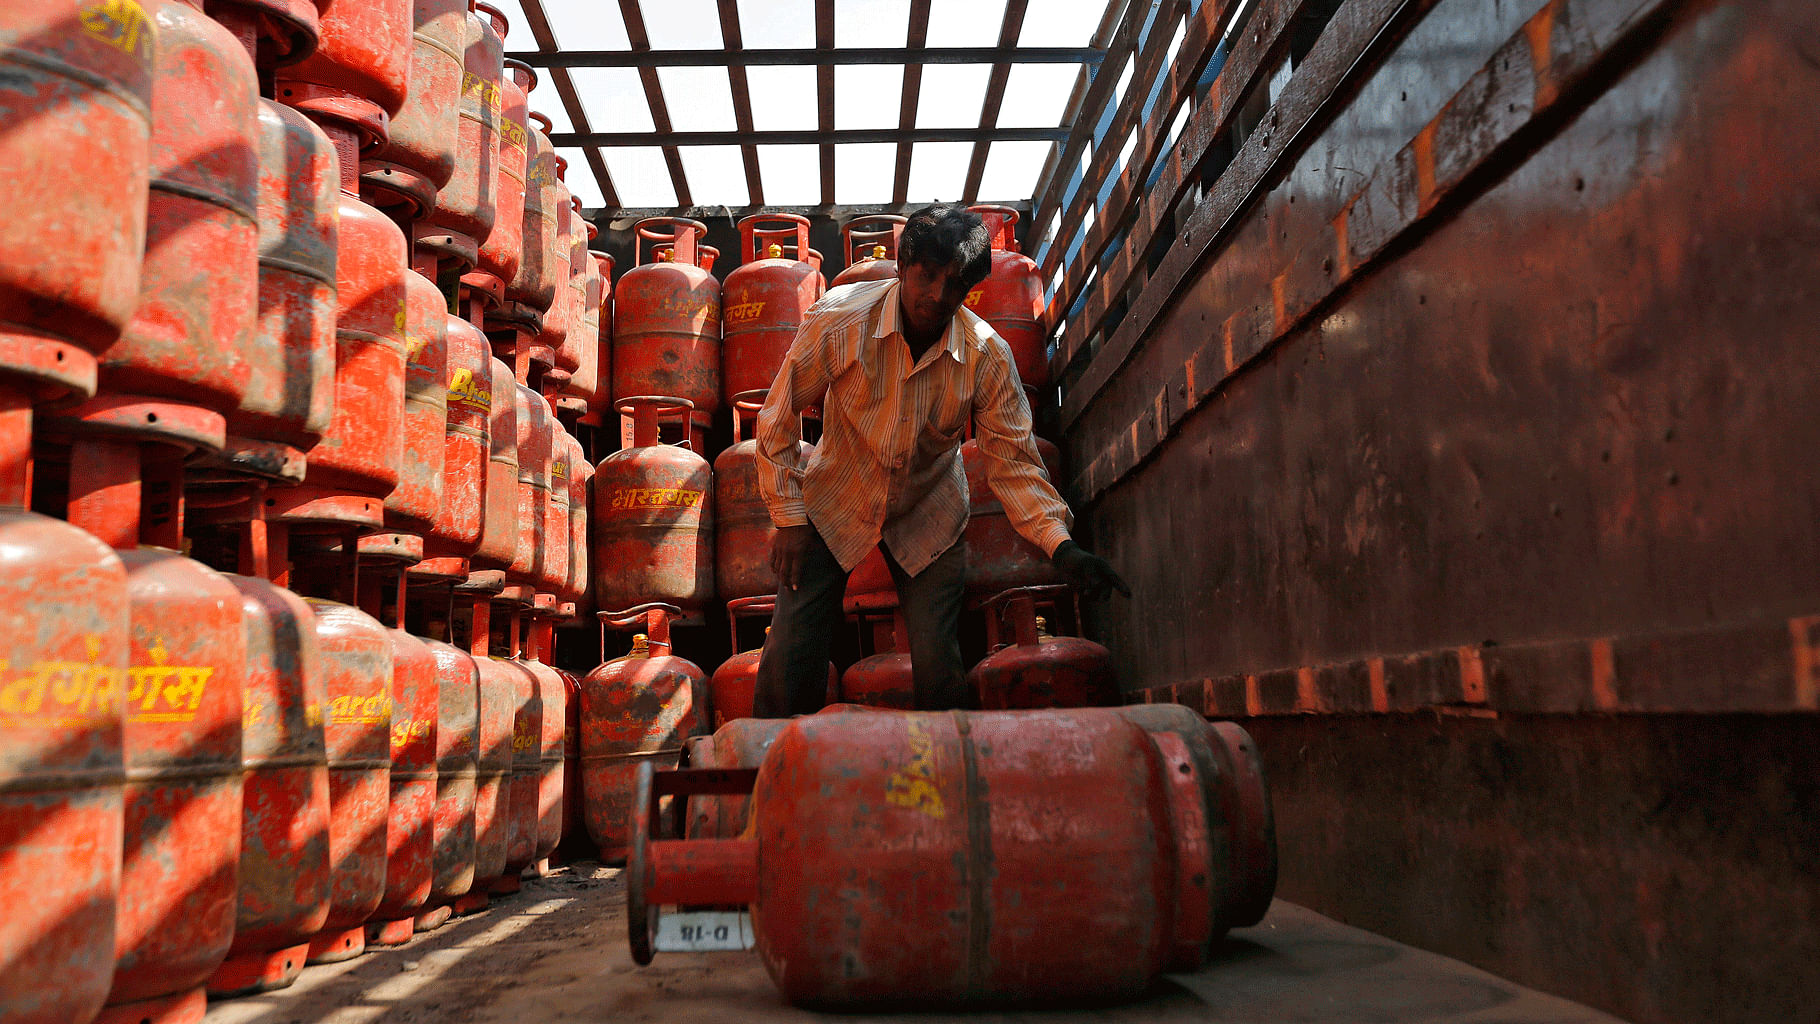 Oil companies are offering a discount of Rs 5 per LPG cylinder on booking and paying online. (Photo: Reuters)